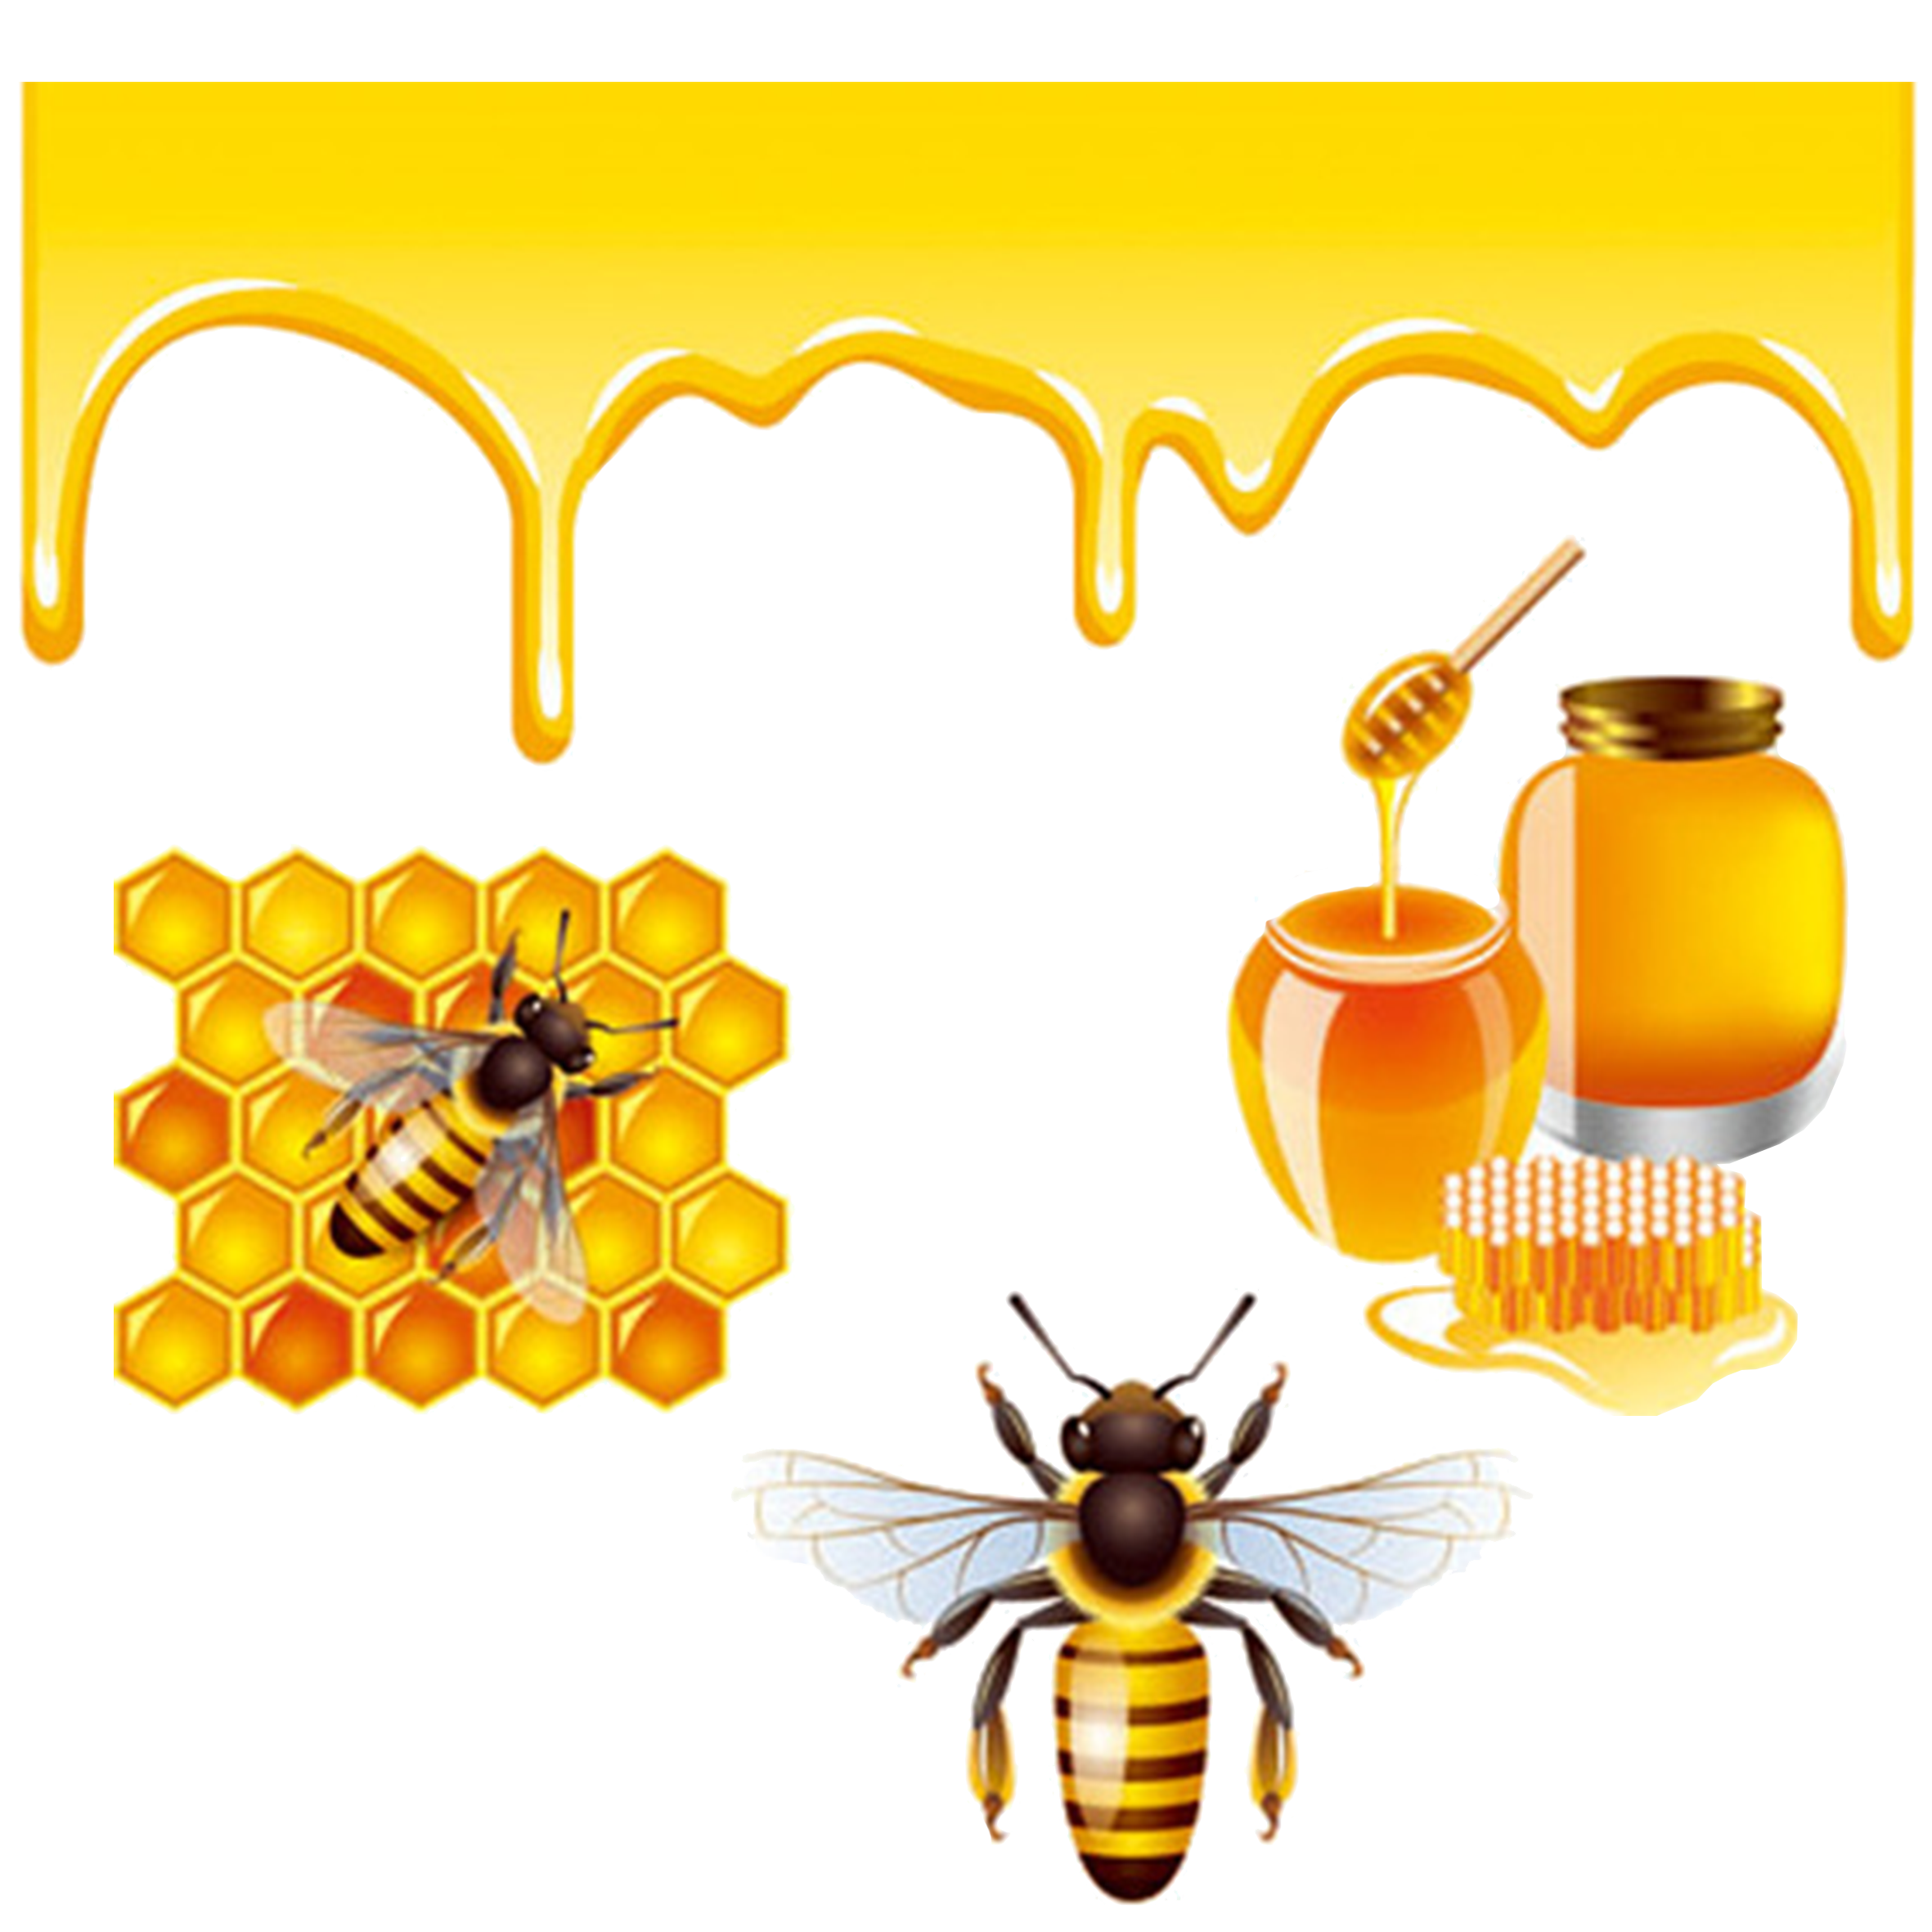 Honey bee Royalty-free - Bees and honey 2362*2362 transprent Png ...